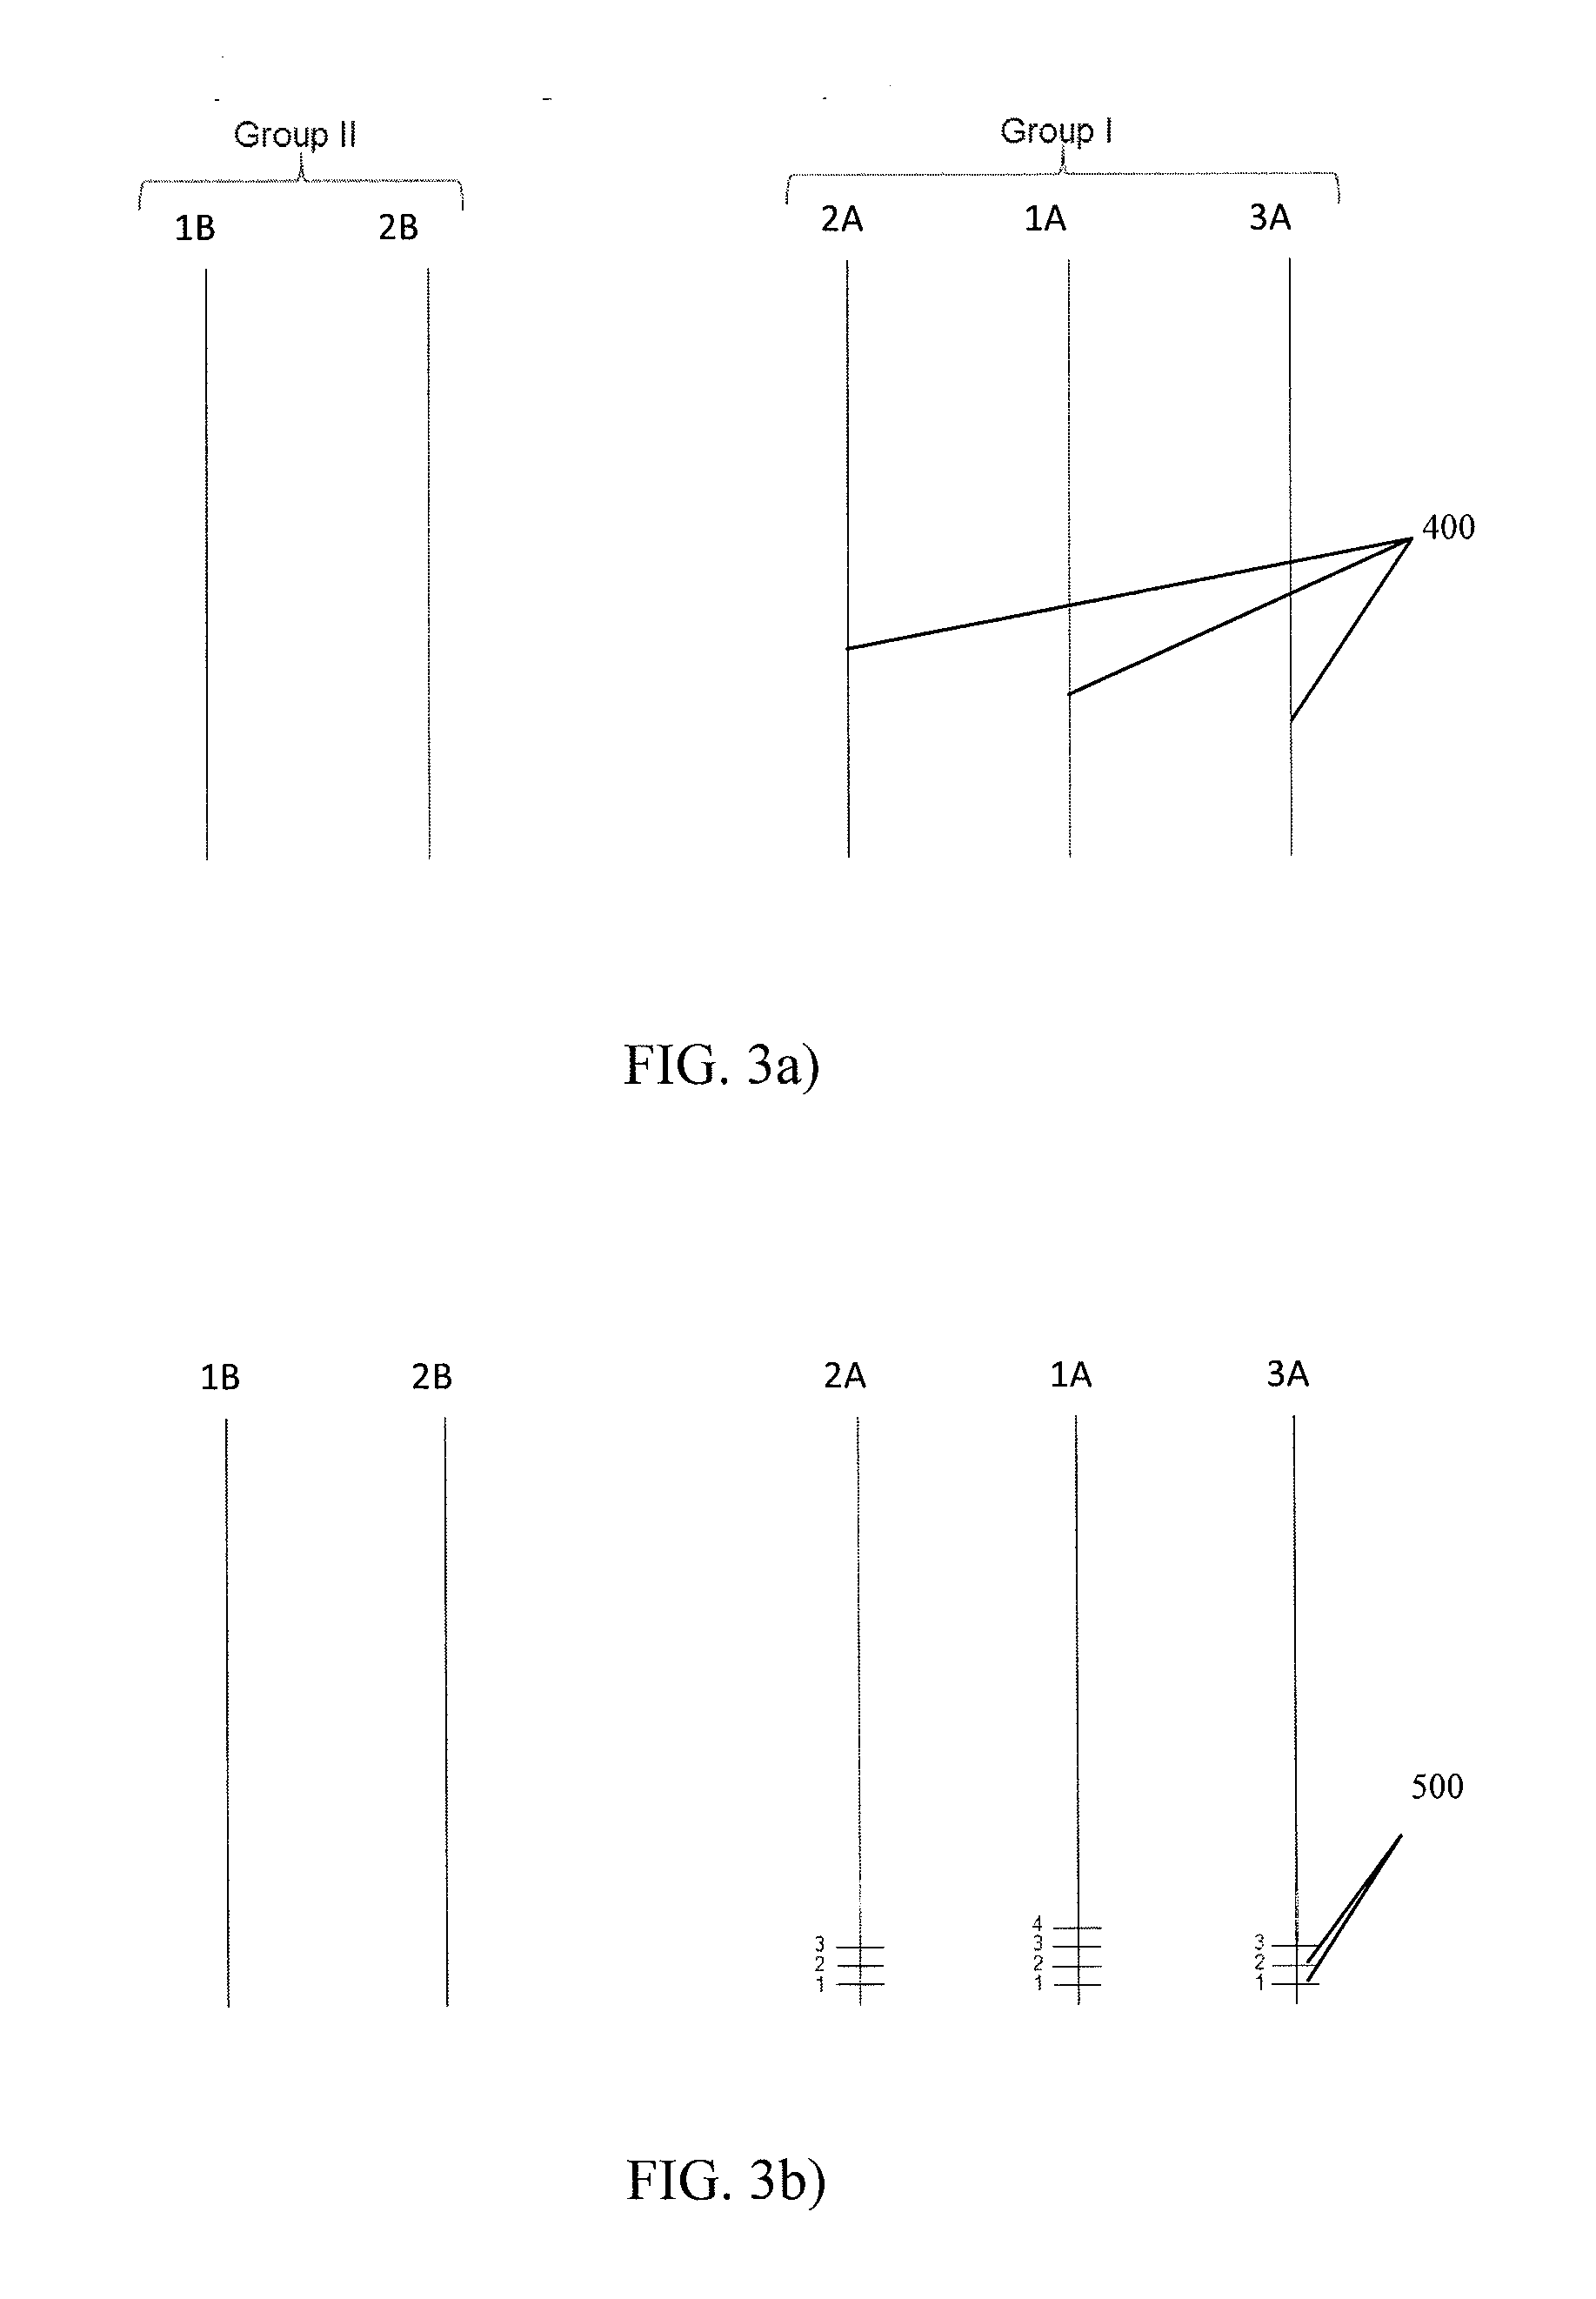 Method of acquiring information of hydraulic fracture geometry for evaluating and optimizing well spacing for multi-well pad